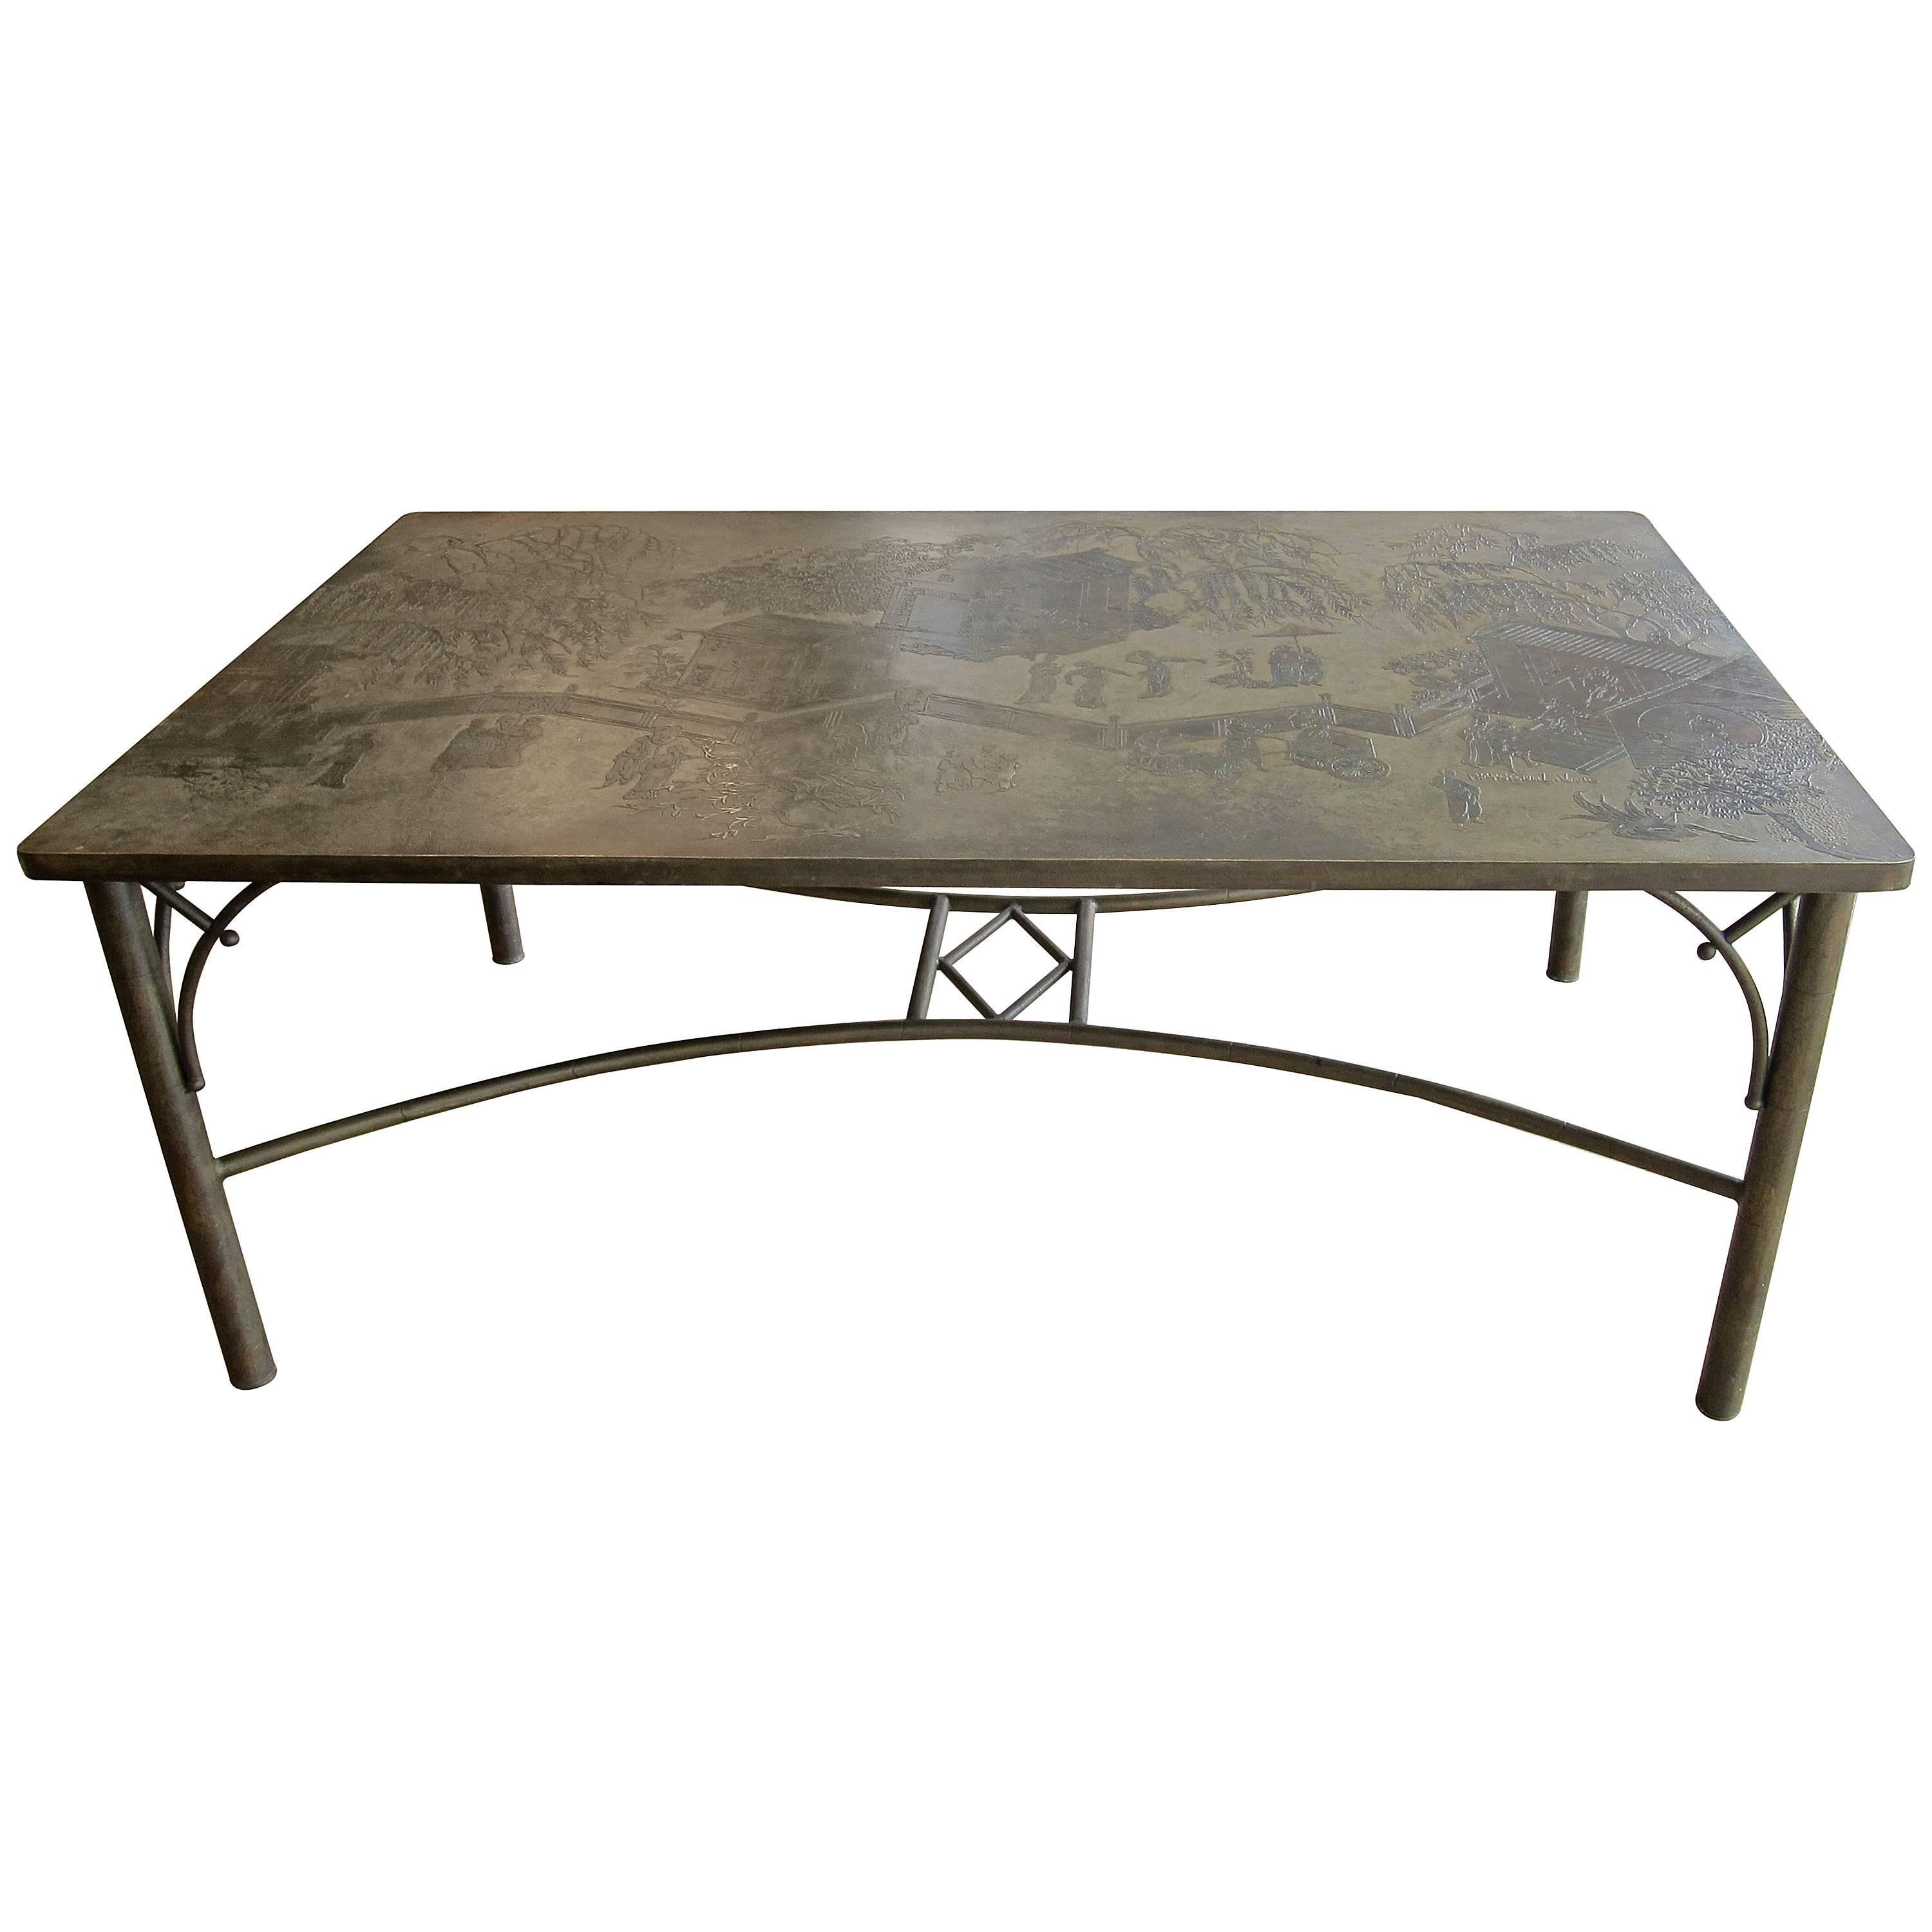 Rare Dining Table "Tao" by Philip & Kelvin LaVerne